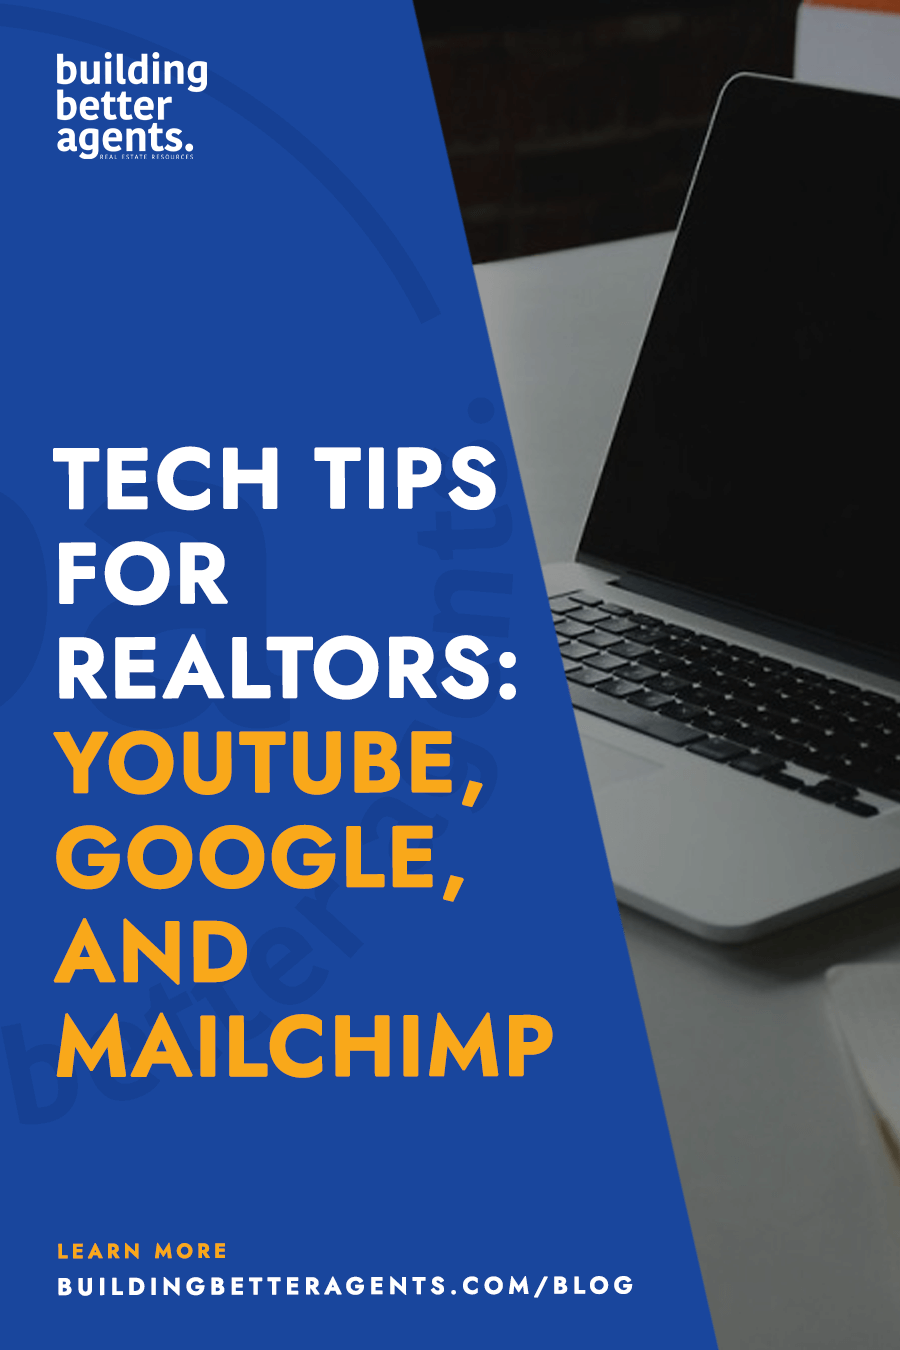 Tech Tips for Realtors: YouTube, Google Plus and MailChimp